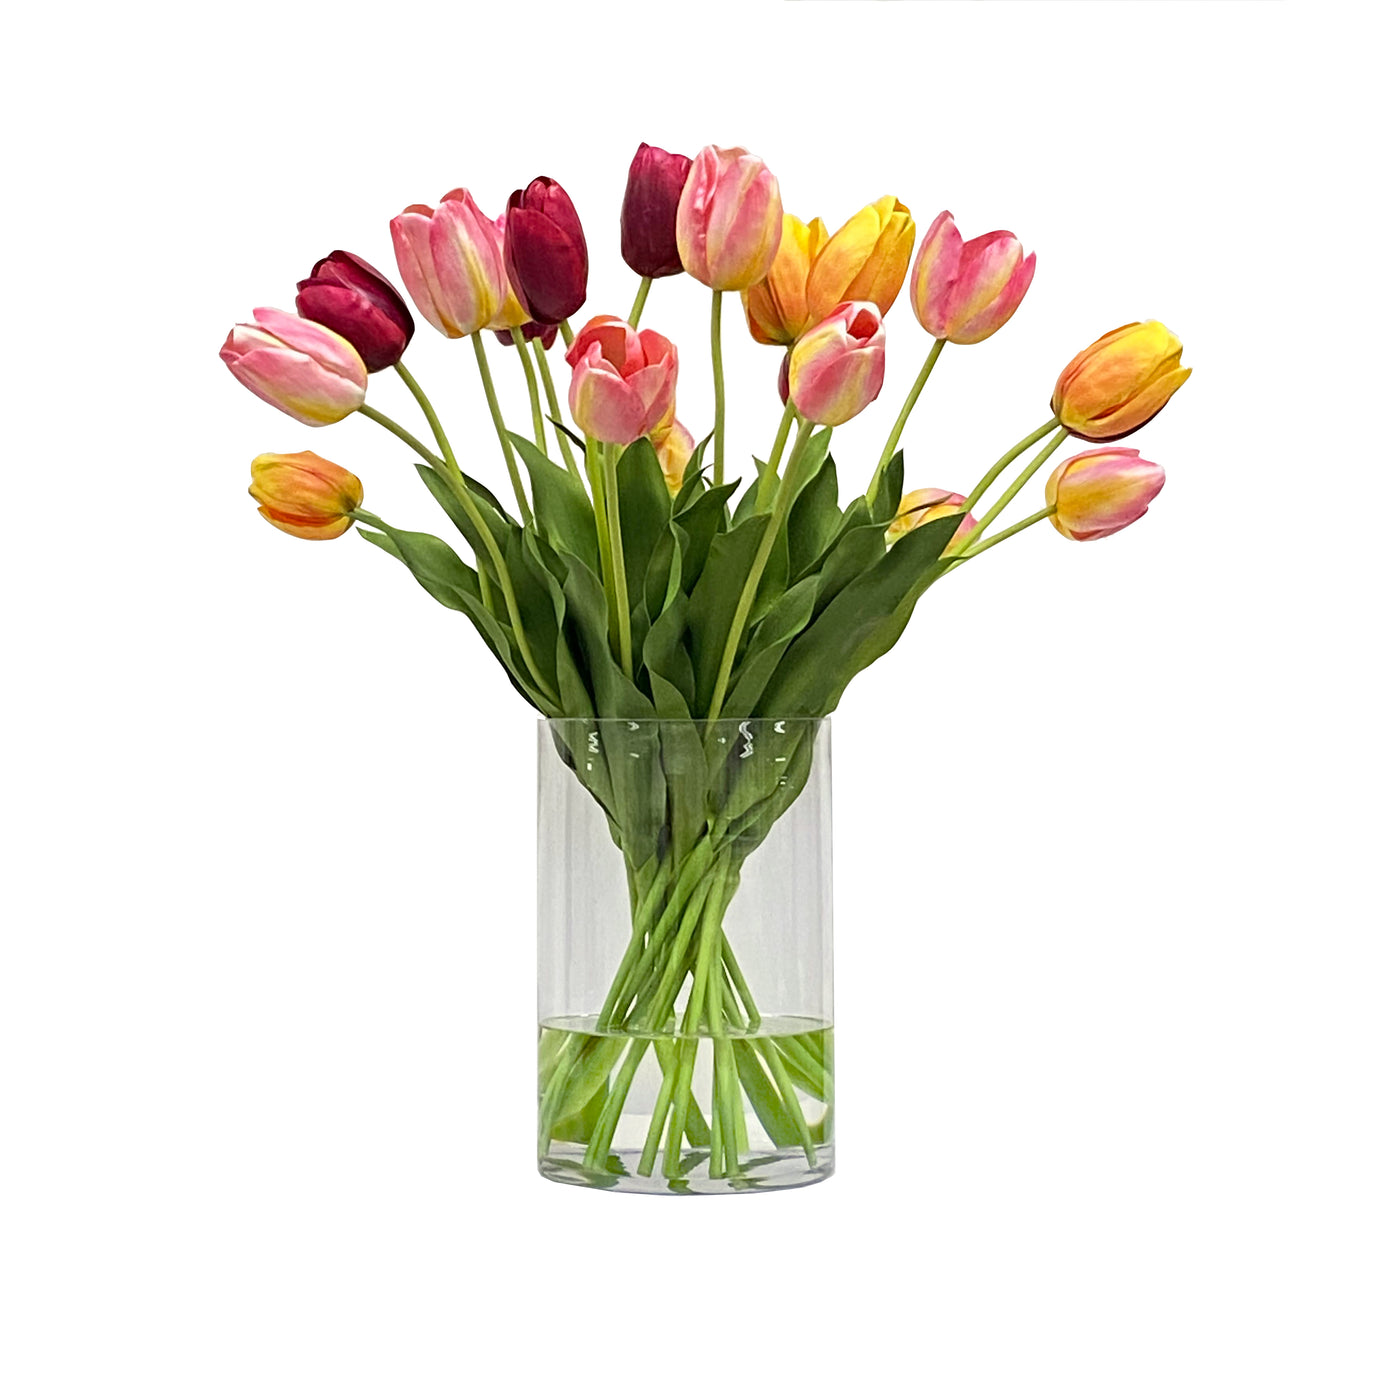 Mixed Spring time Tulips in a Vase 27 inches